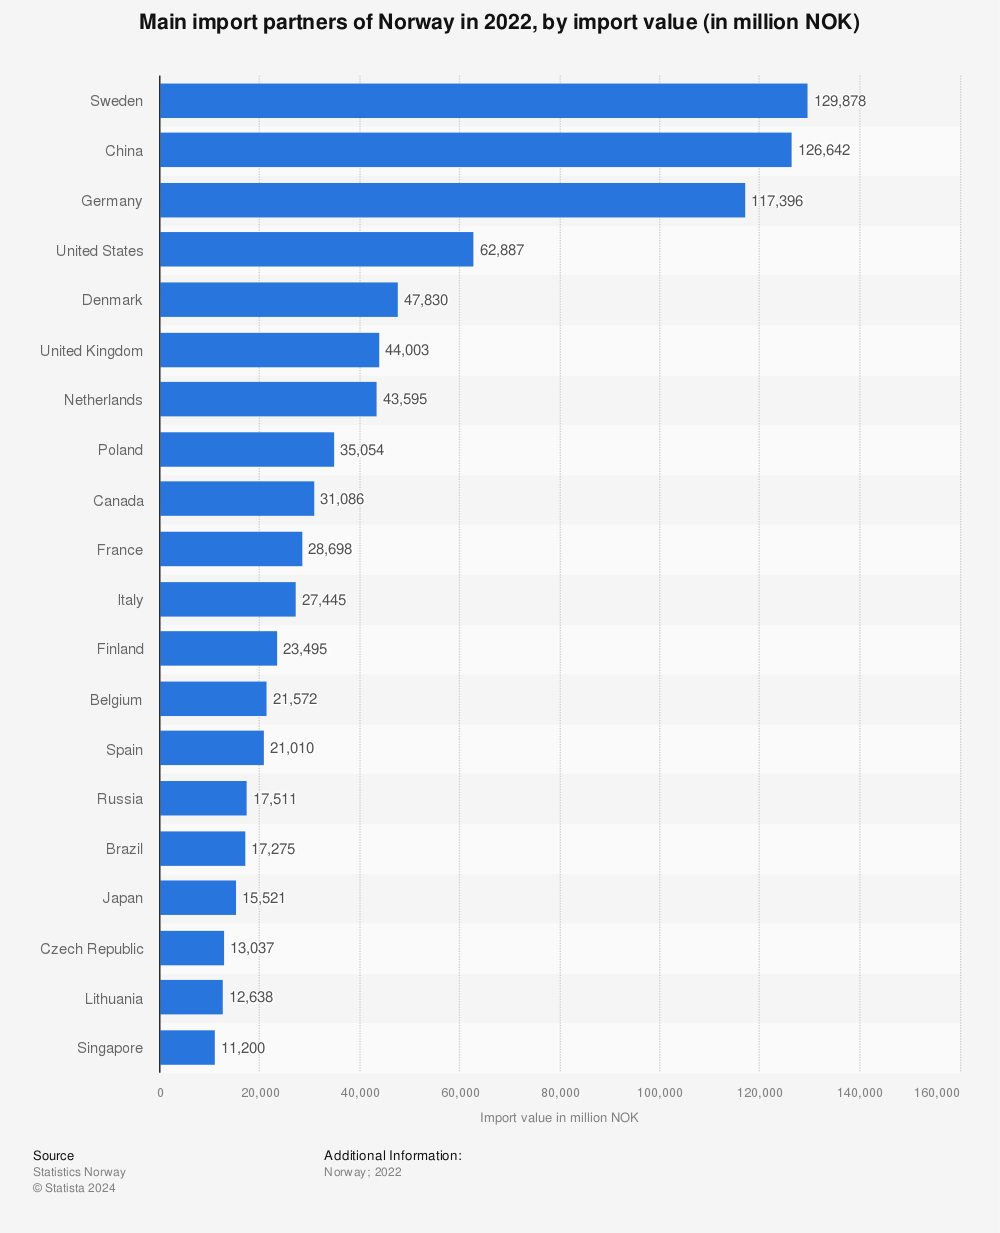 Statistic: Main import partners of Norway in 2022, by import value (in million NOK) | Statista